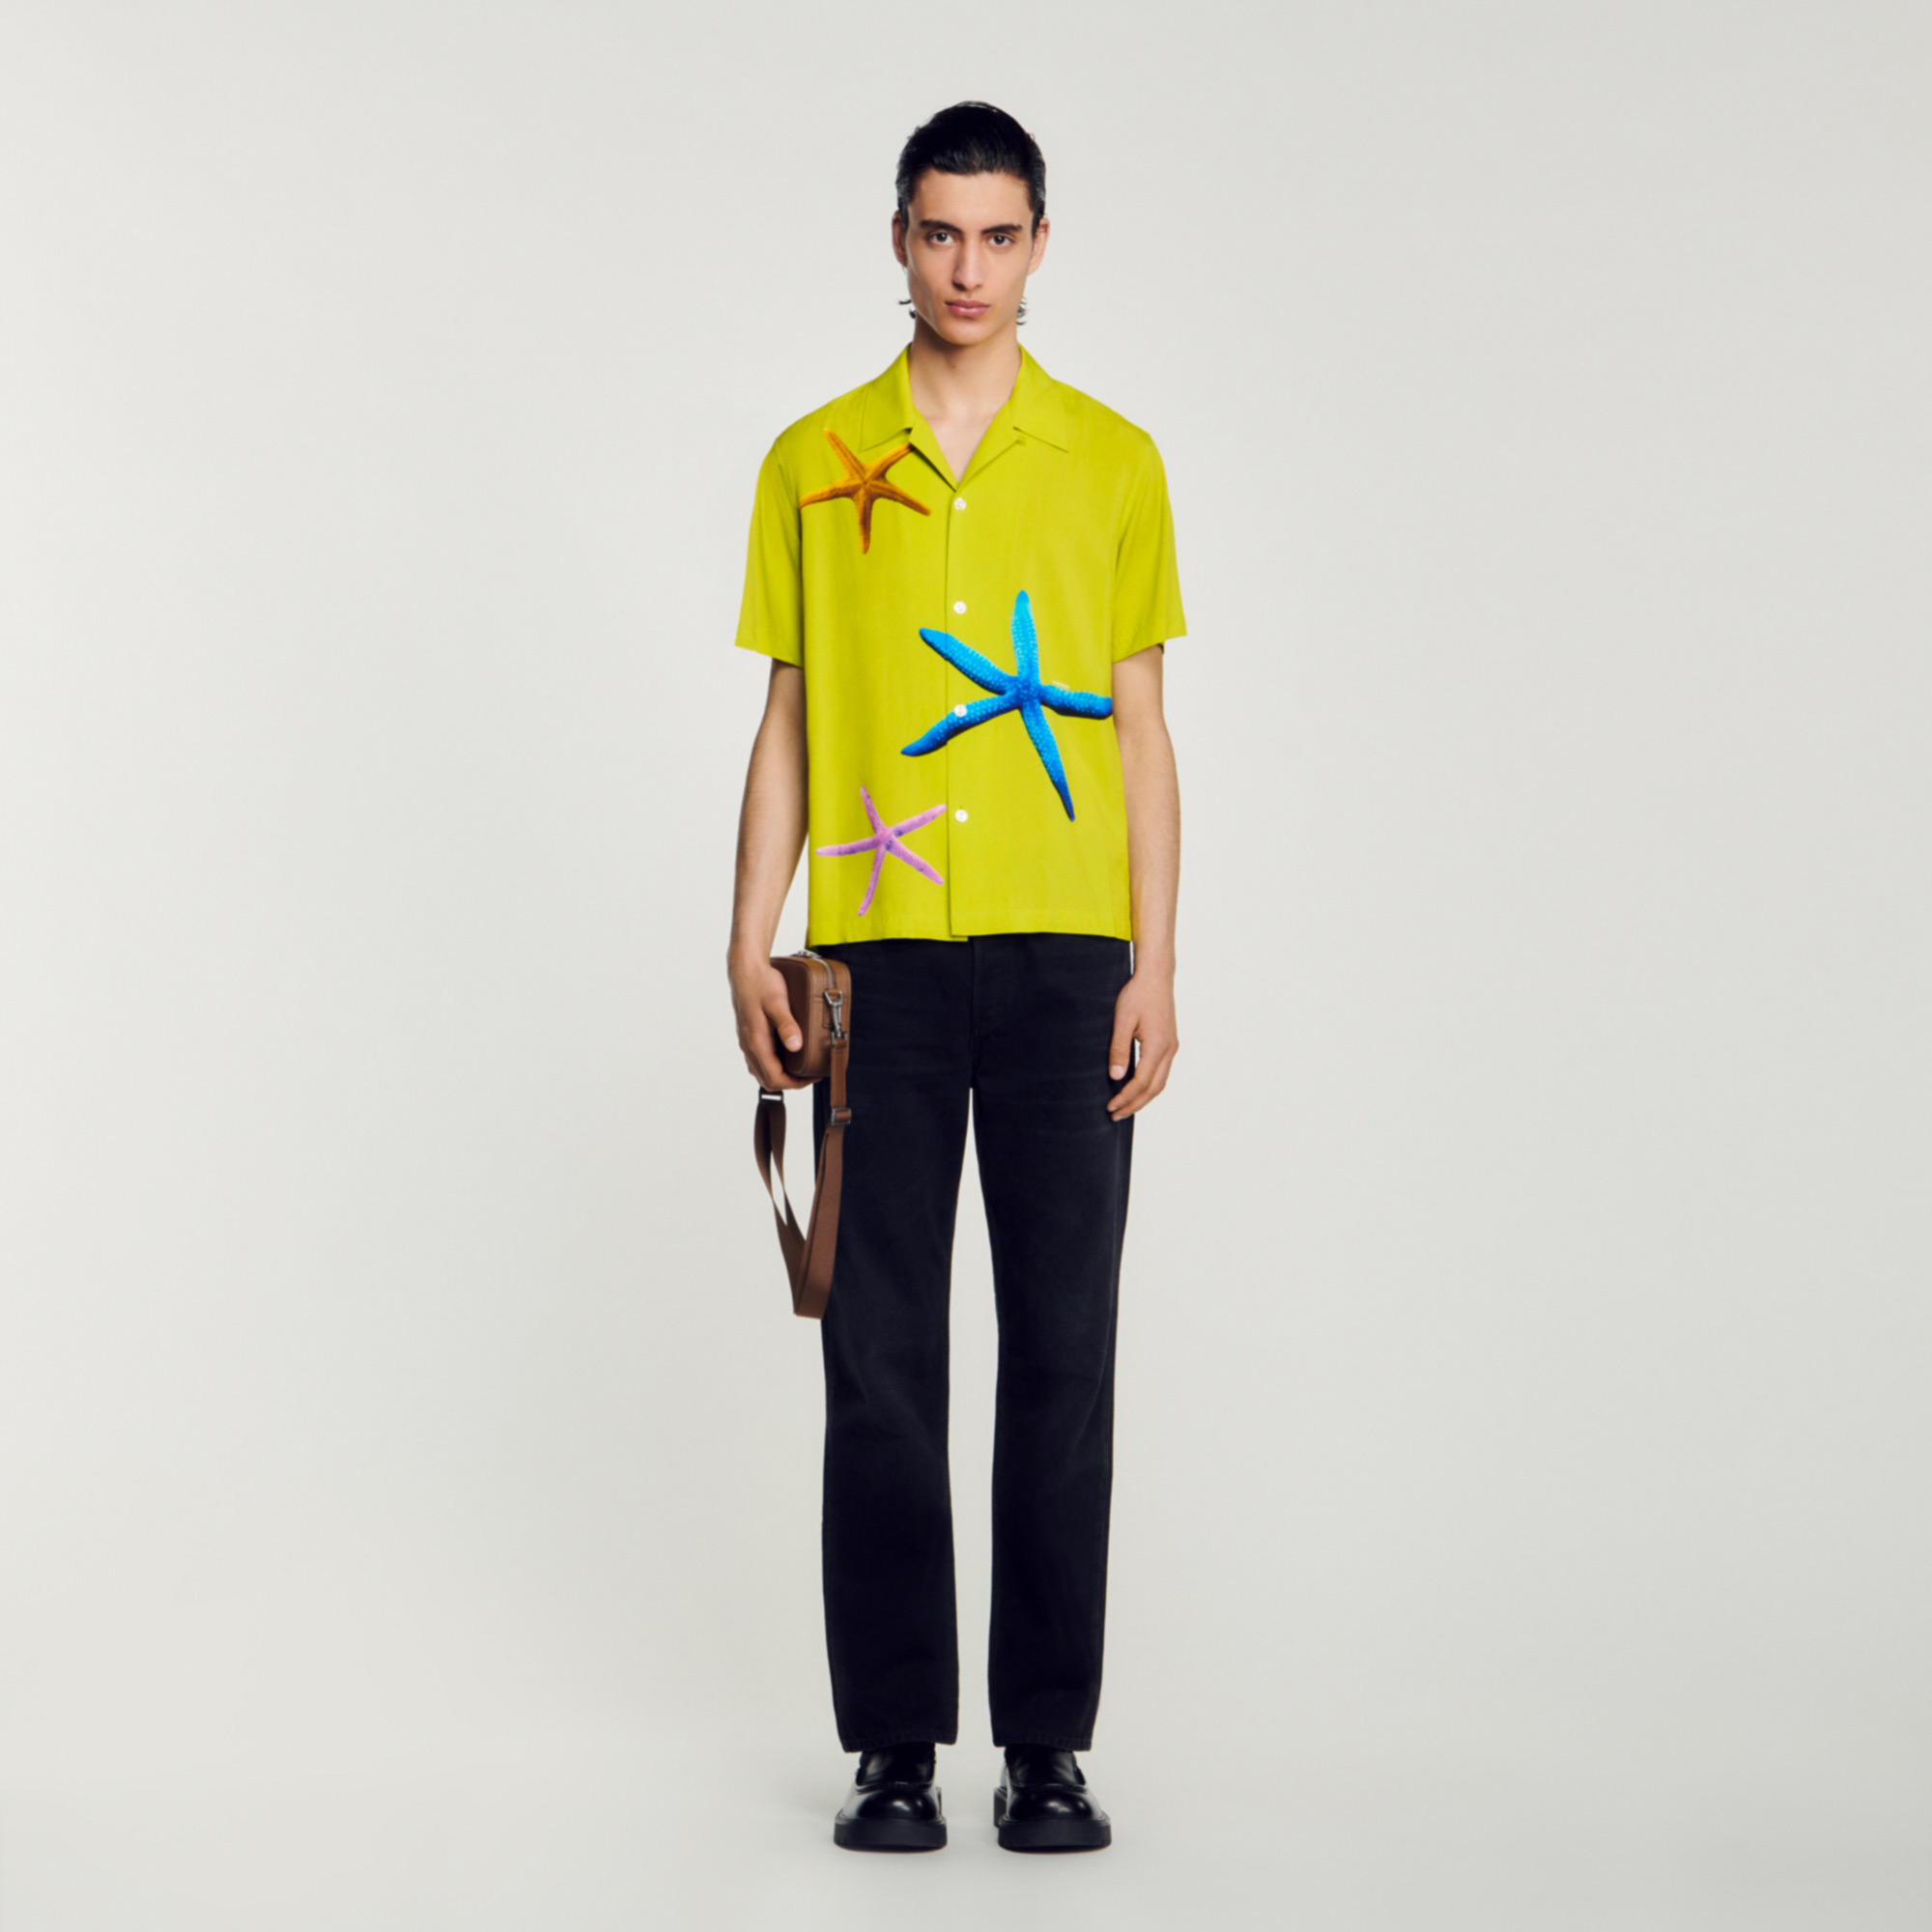 Sandro viscose Flowing shirt with a spread collar, short sleeves, a button fastening, and a starfish print